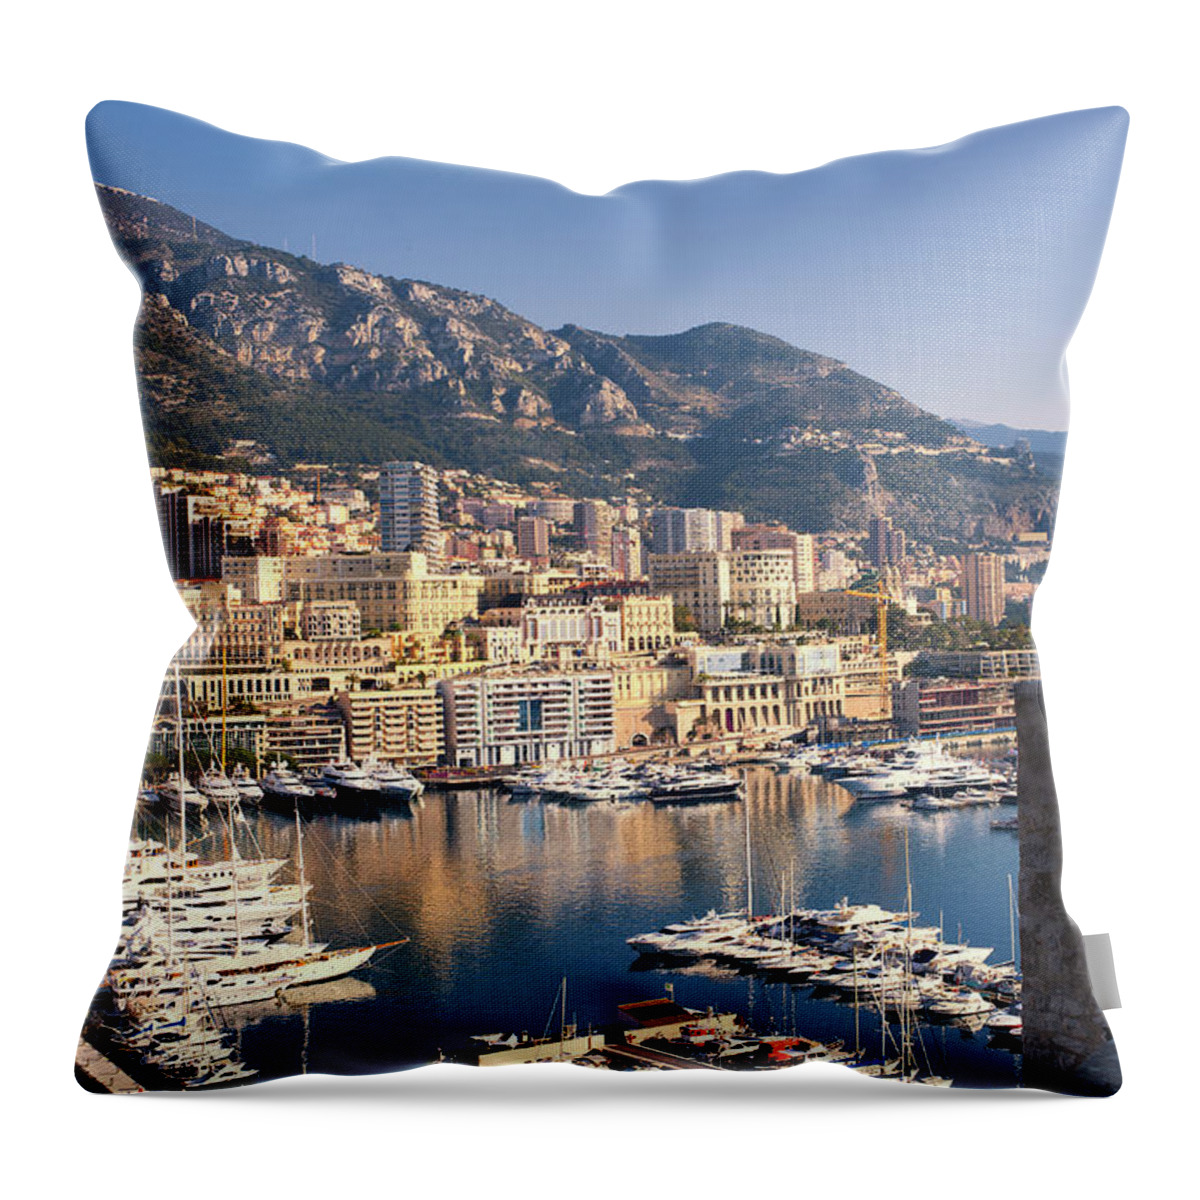 Tranquility Throw Pillow featuring the photograph Monaco Harbor by Copyright (c) Richard Susanto